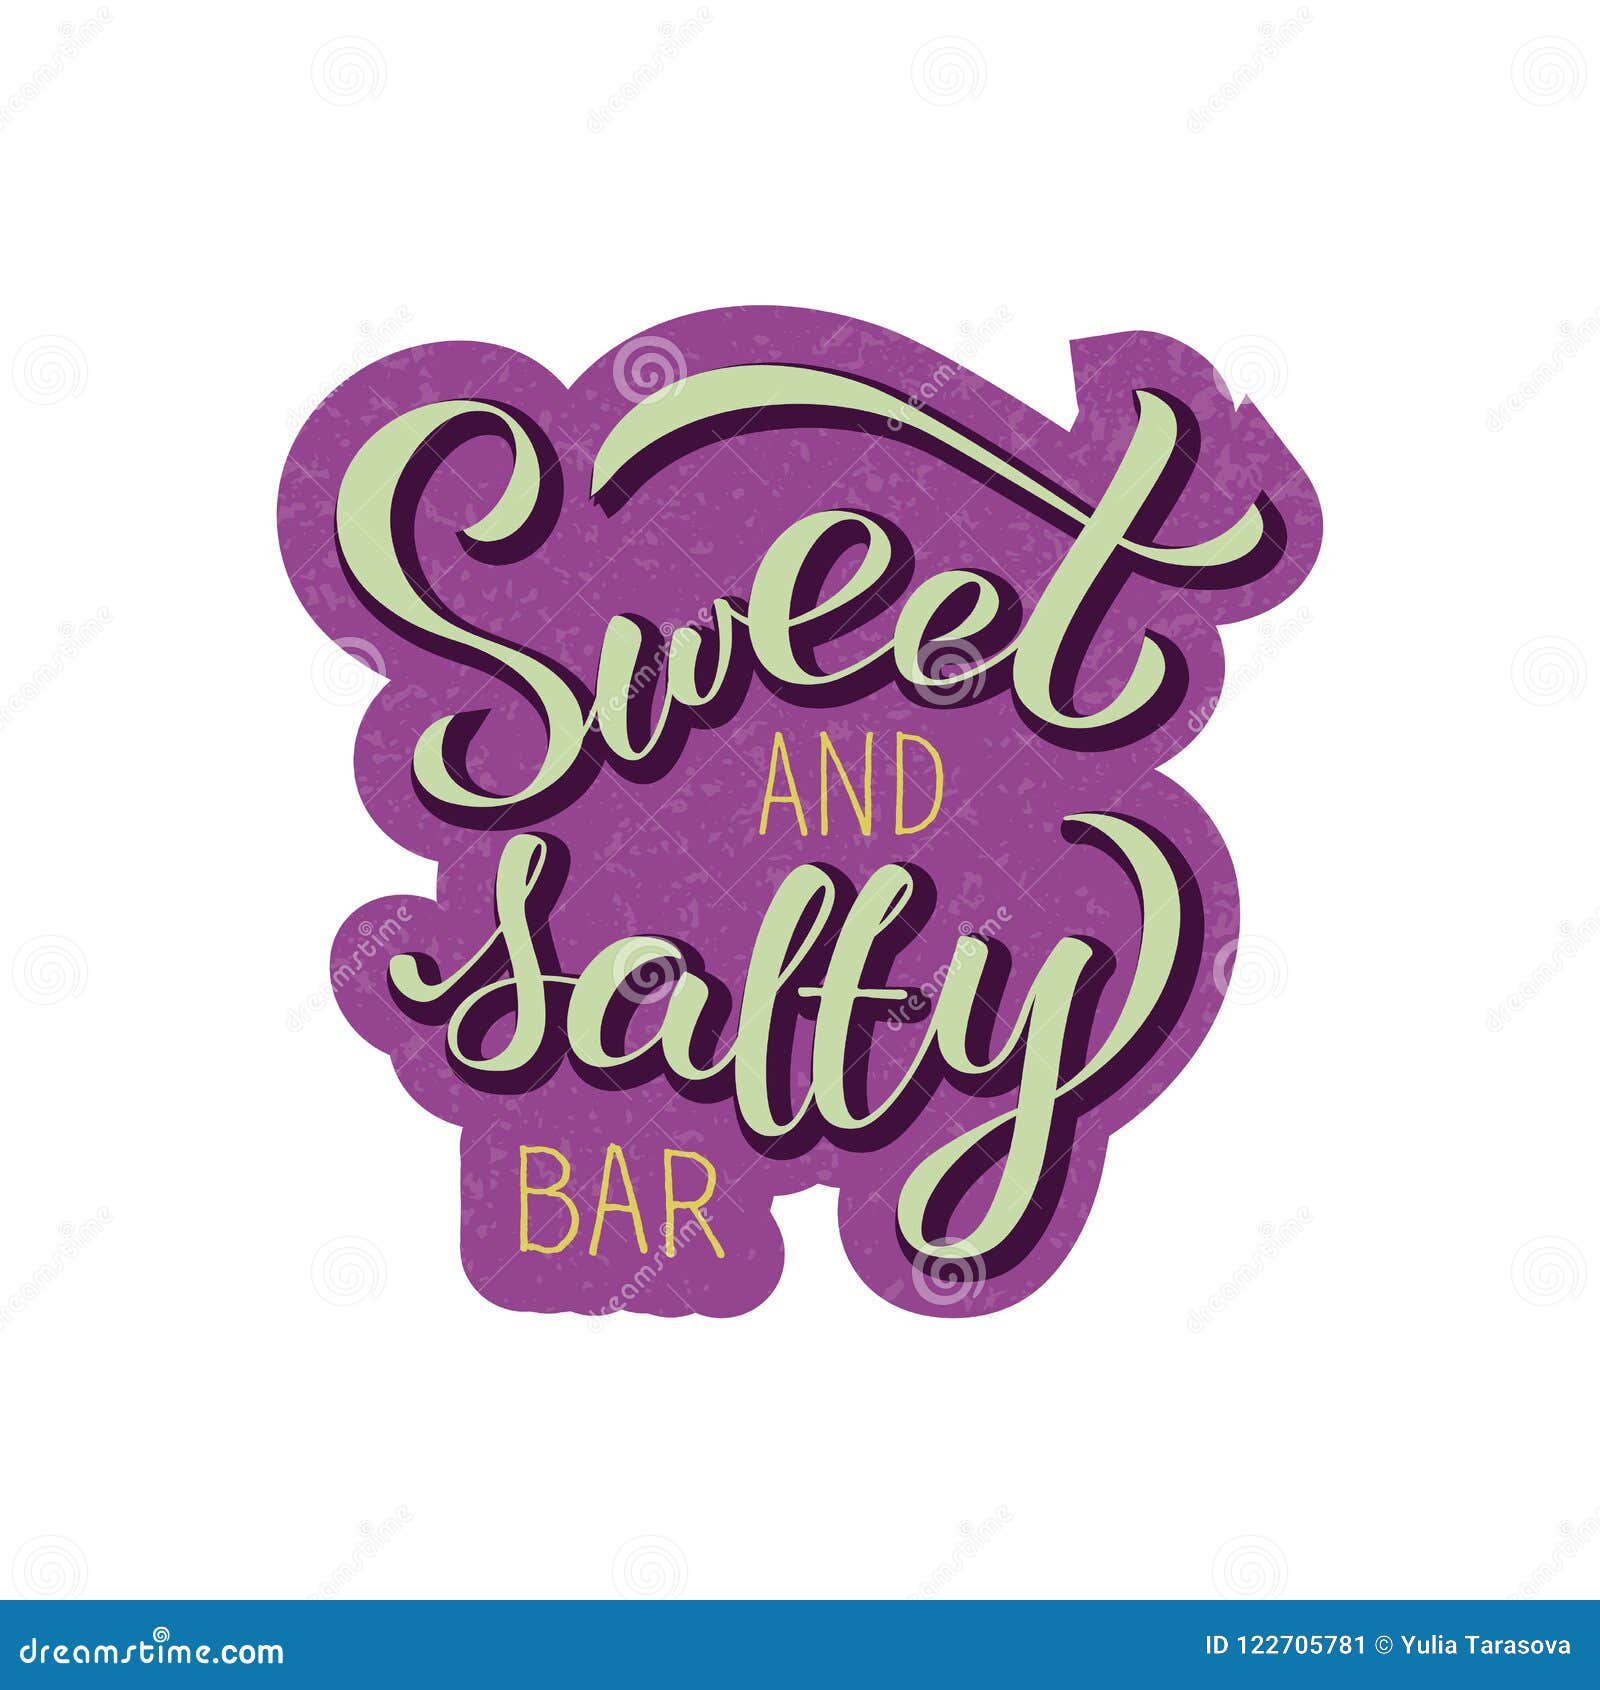 Download Sweet and salty bar stock vector. Illustration of blurb ...